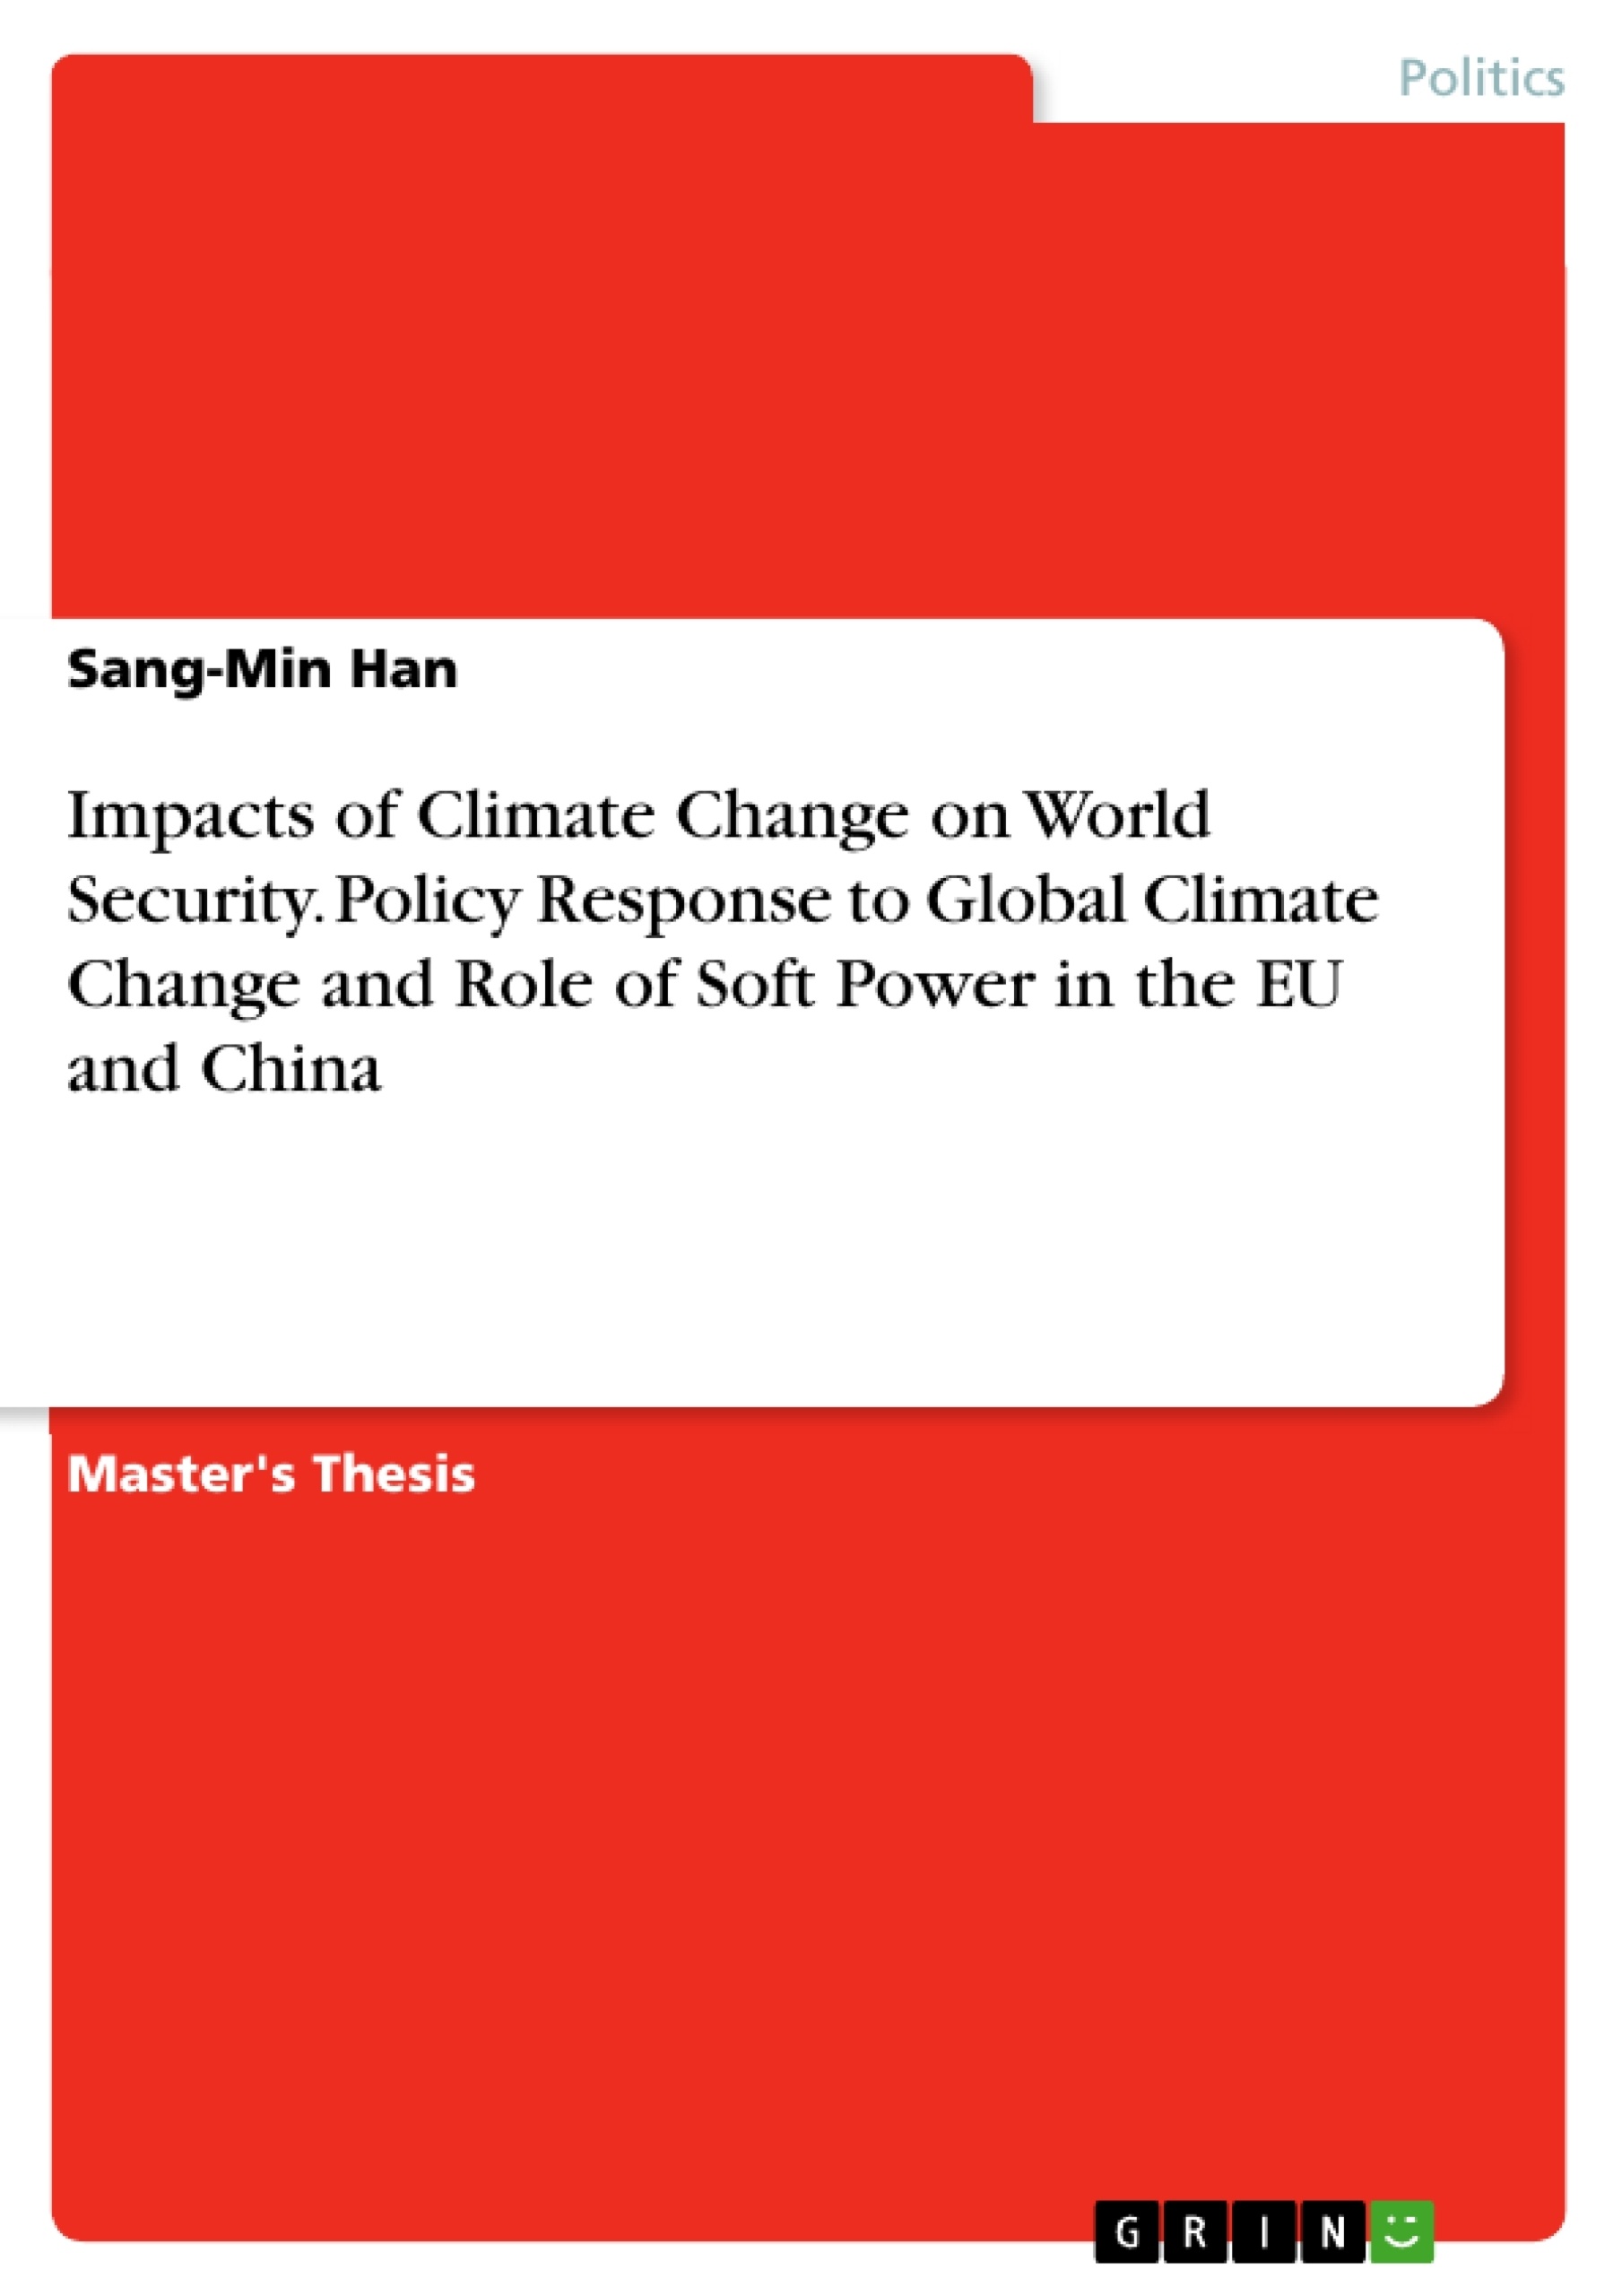 Titre: Impacts of Climate Change on World Security. Policy Response to Global Climate Change and Role of Soft Power in the EU and China